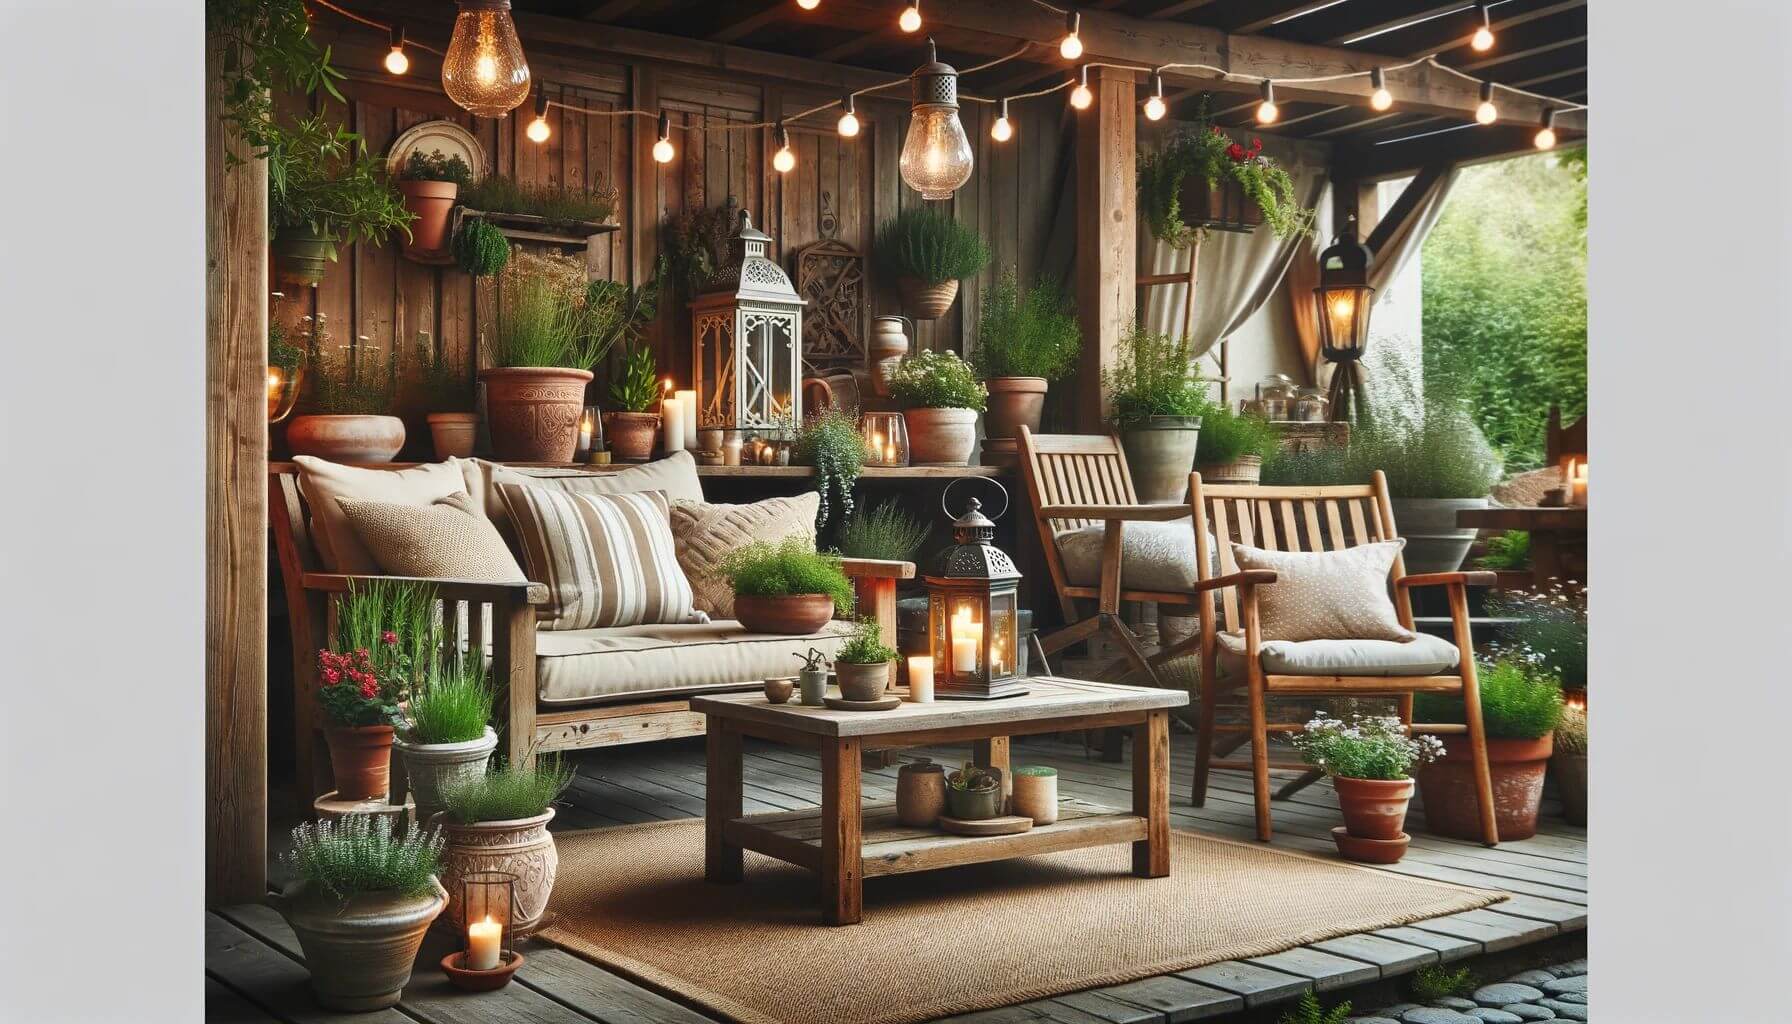 Farmhouse Style in Outdoor Spaces